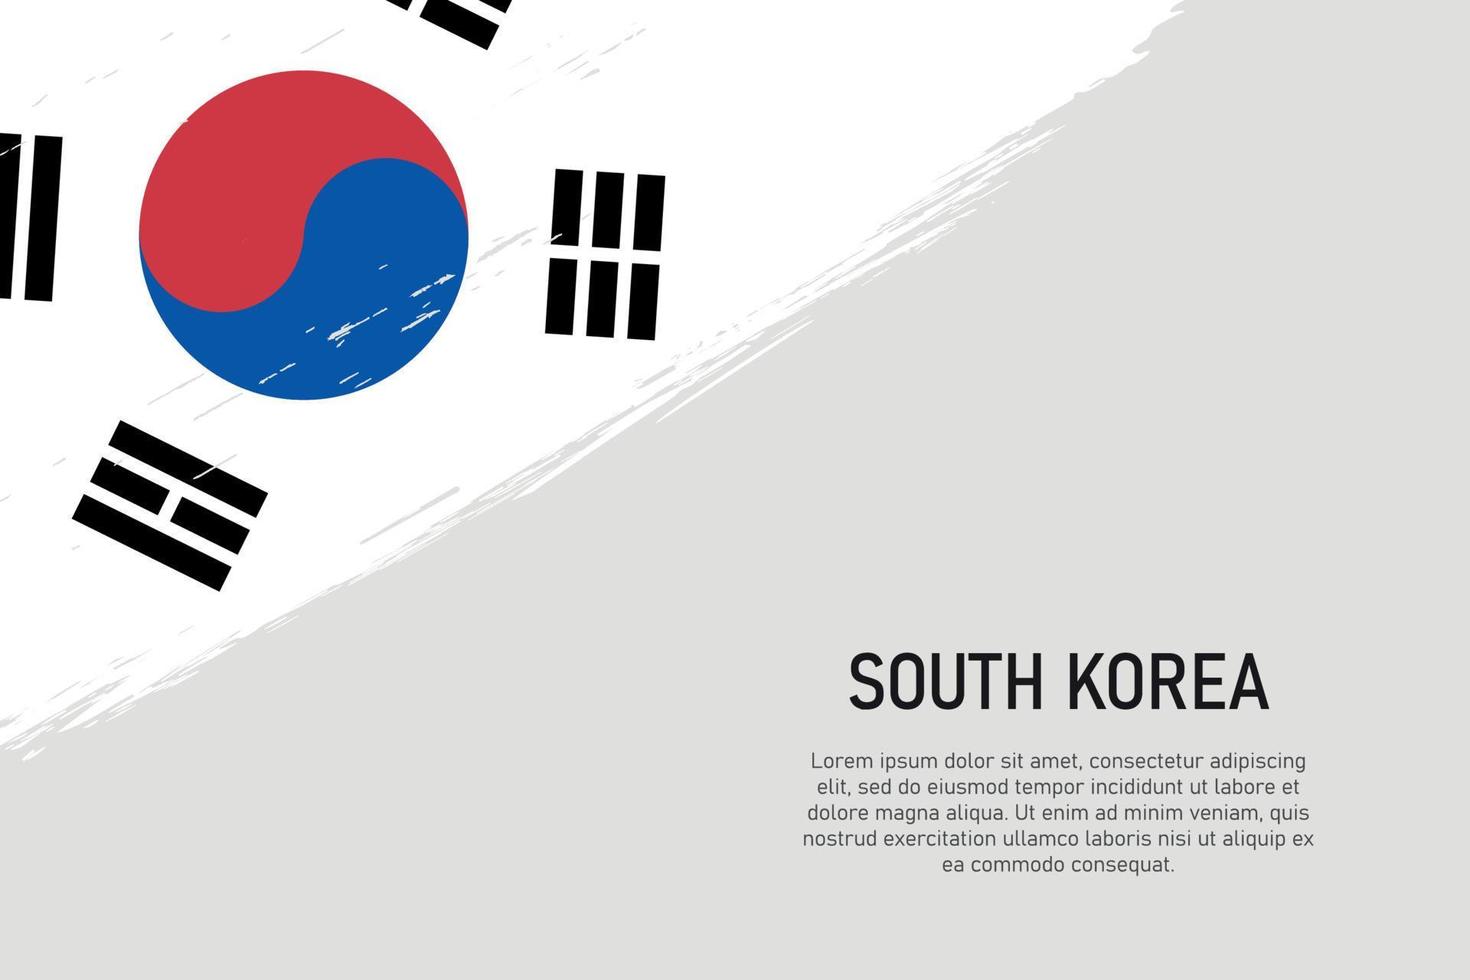 Grunge styled brush stroke background with flag of South Korea vector